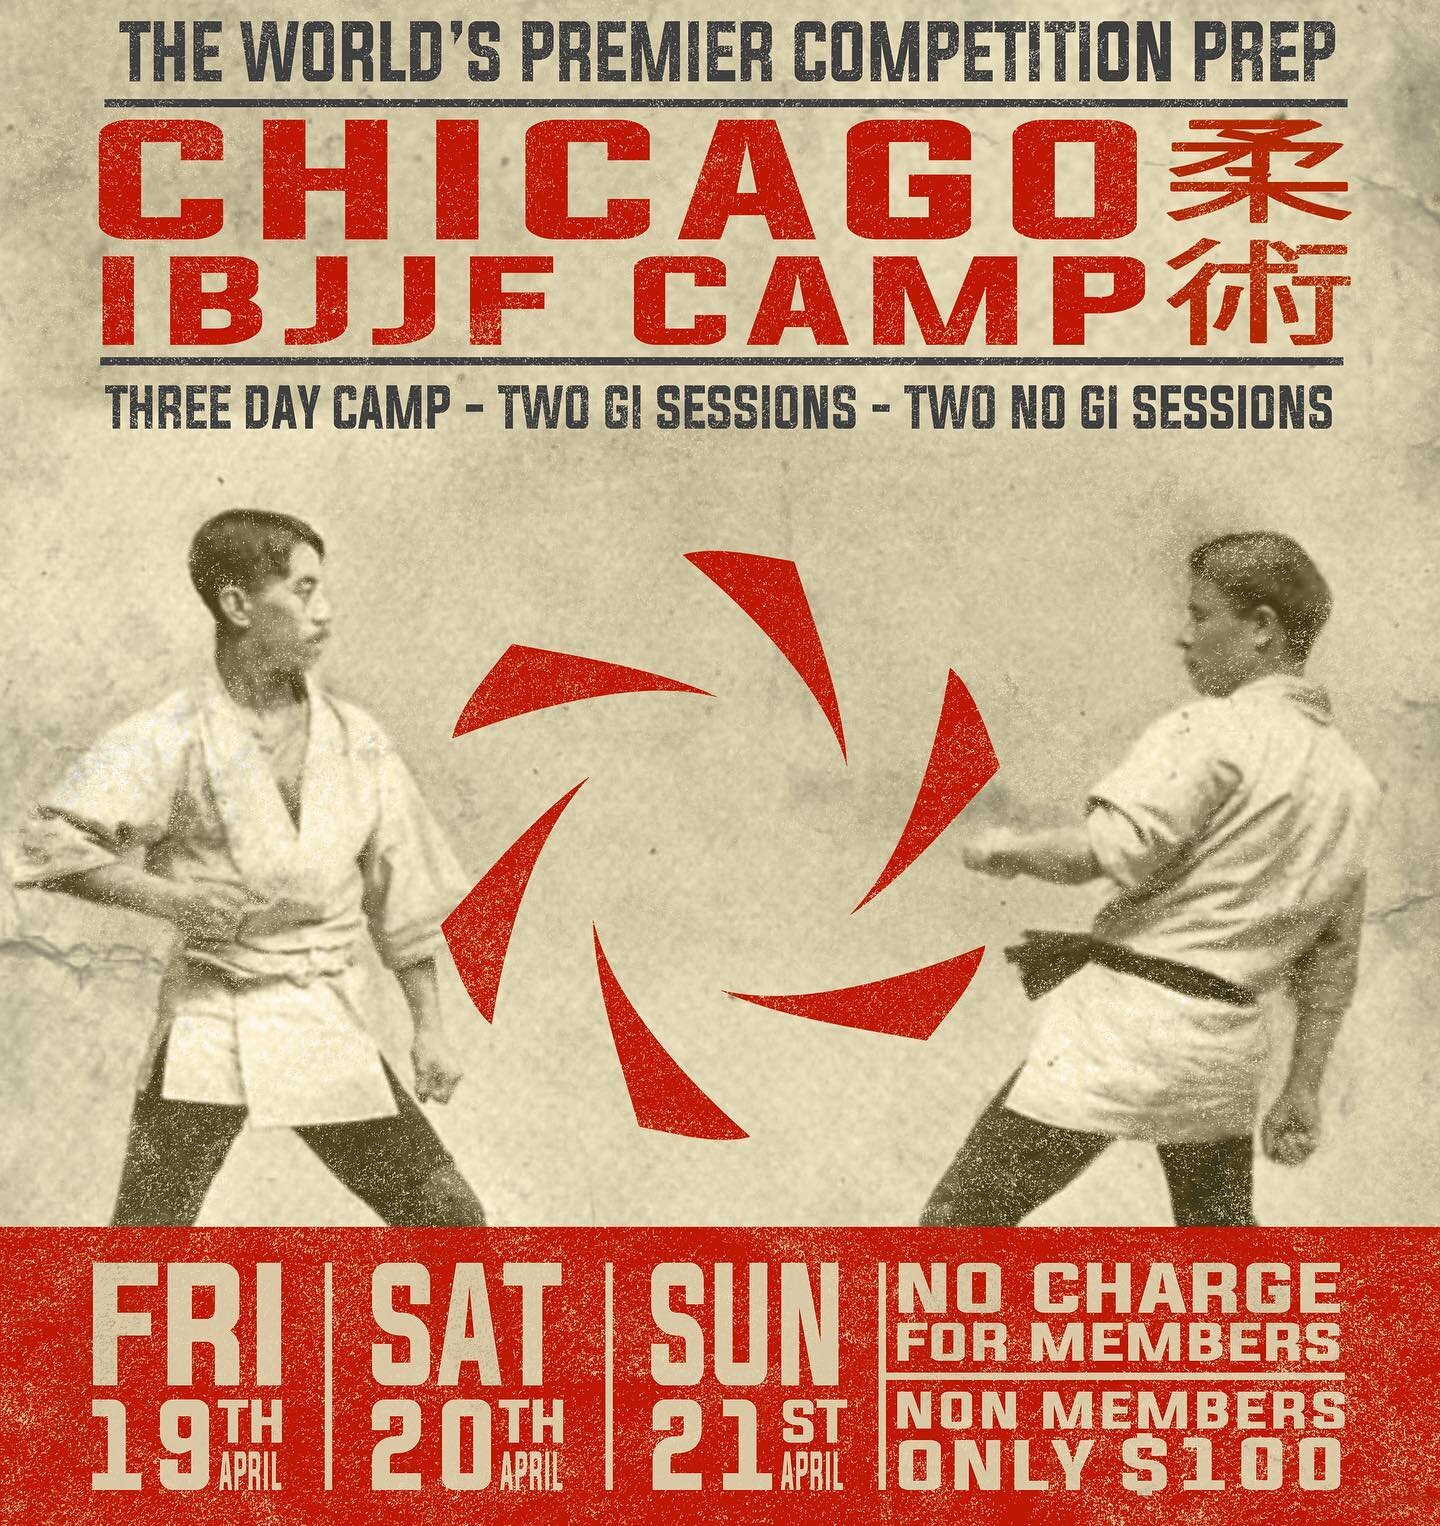 Link in bio: Attention Midwest grapplers! Join us for a three-day camp in preparation for the IBJJF Chicago Open. Details:

Free for Hurricane Students - $100 for non-students. All are welcome. You do not have to be a competitor to attend! This three